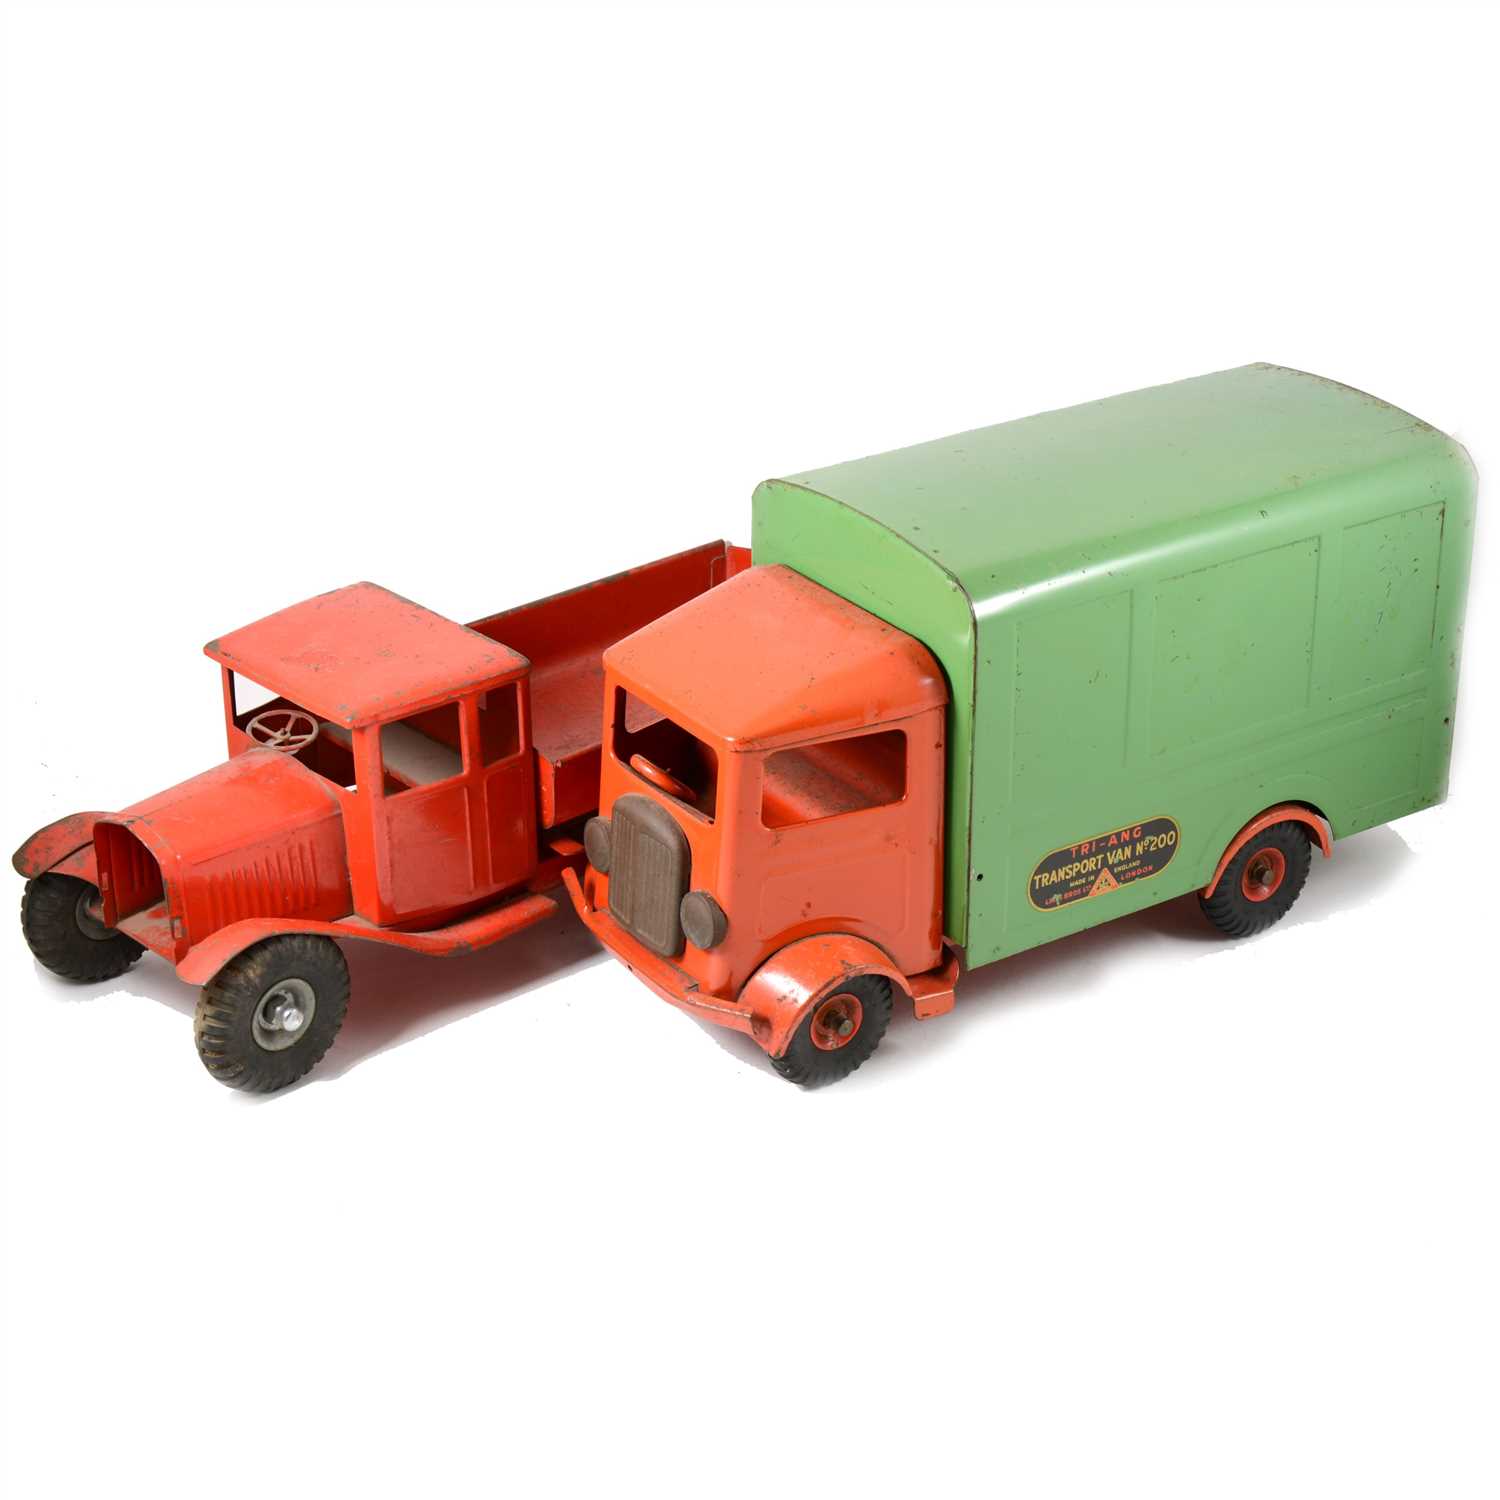 Lot 58 - Tri-ang Toys; Transport van no.200, and a red tipper truck.